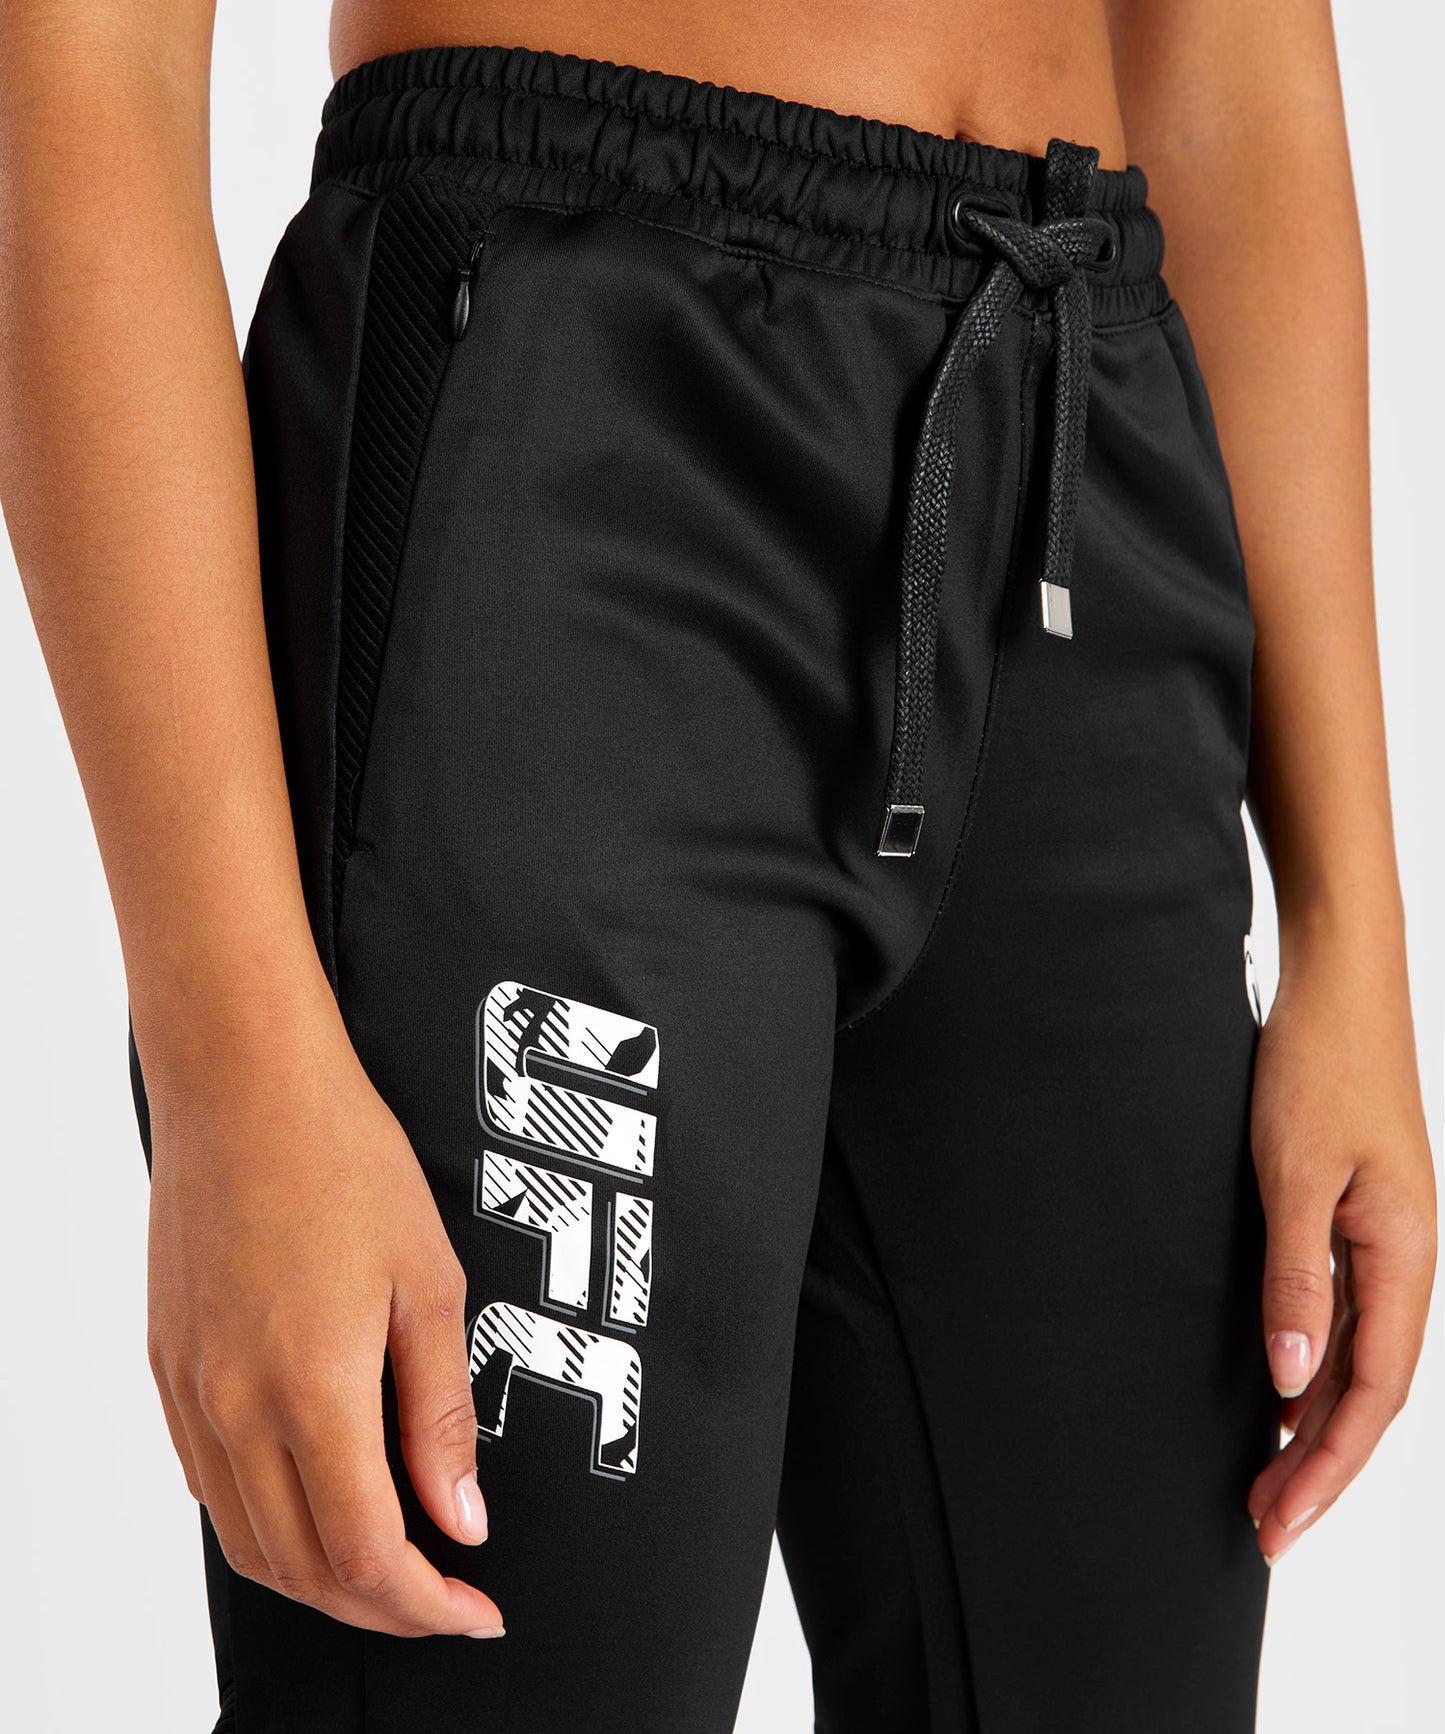 Best Venum Joggers: Combat-Ready Fashion Meets Relaxation